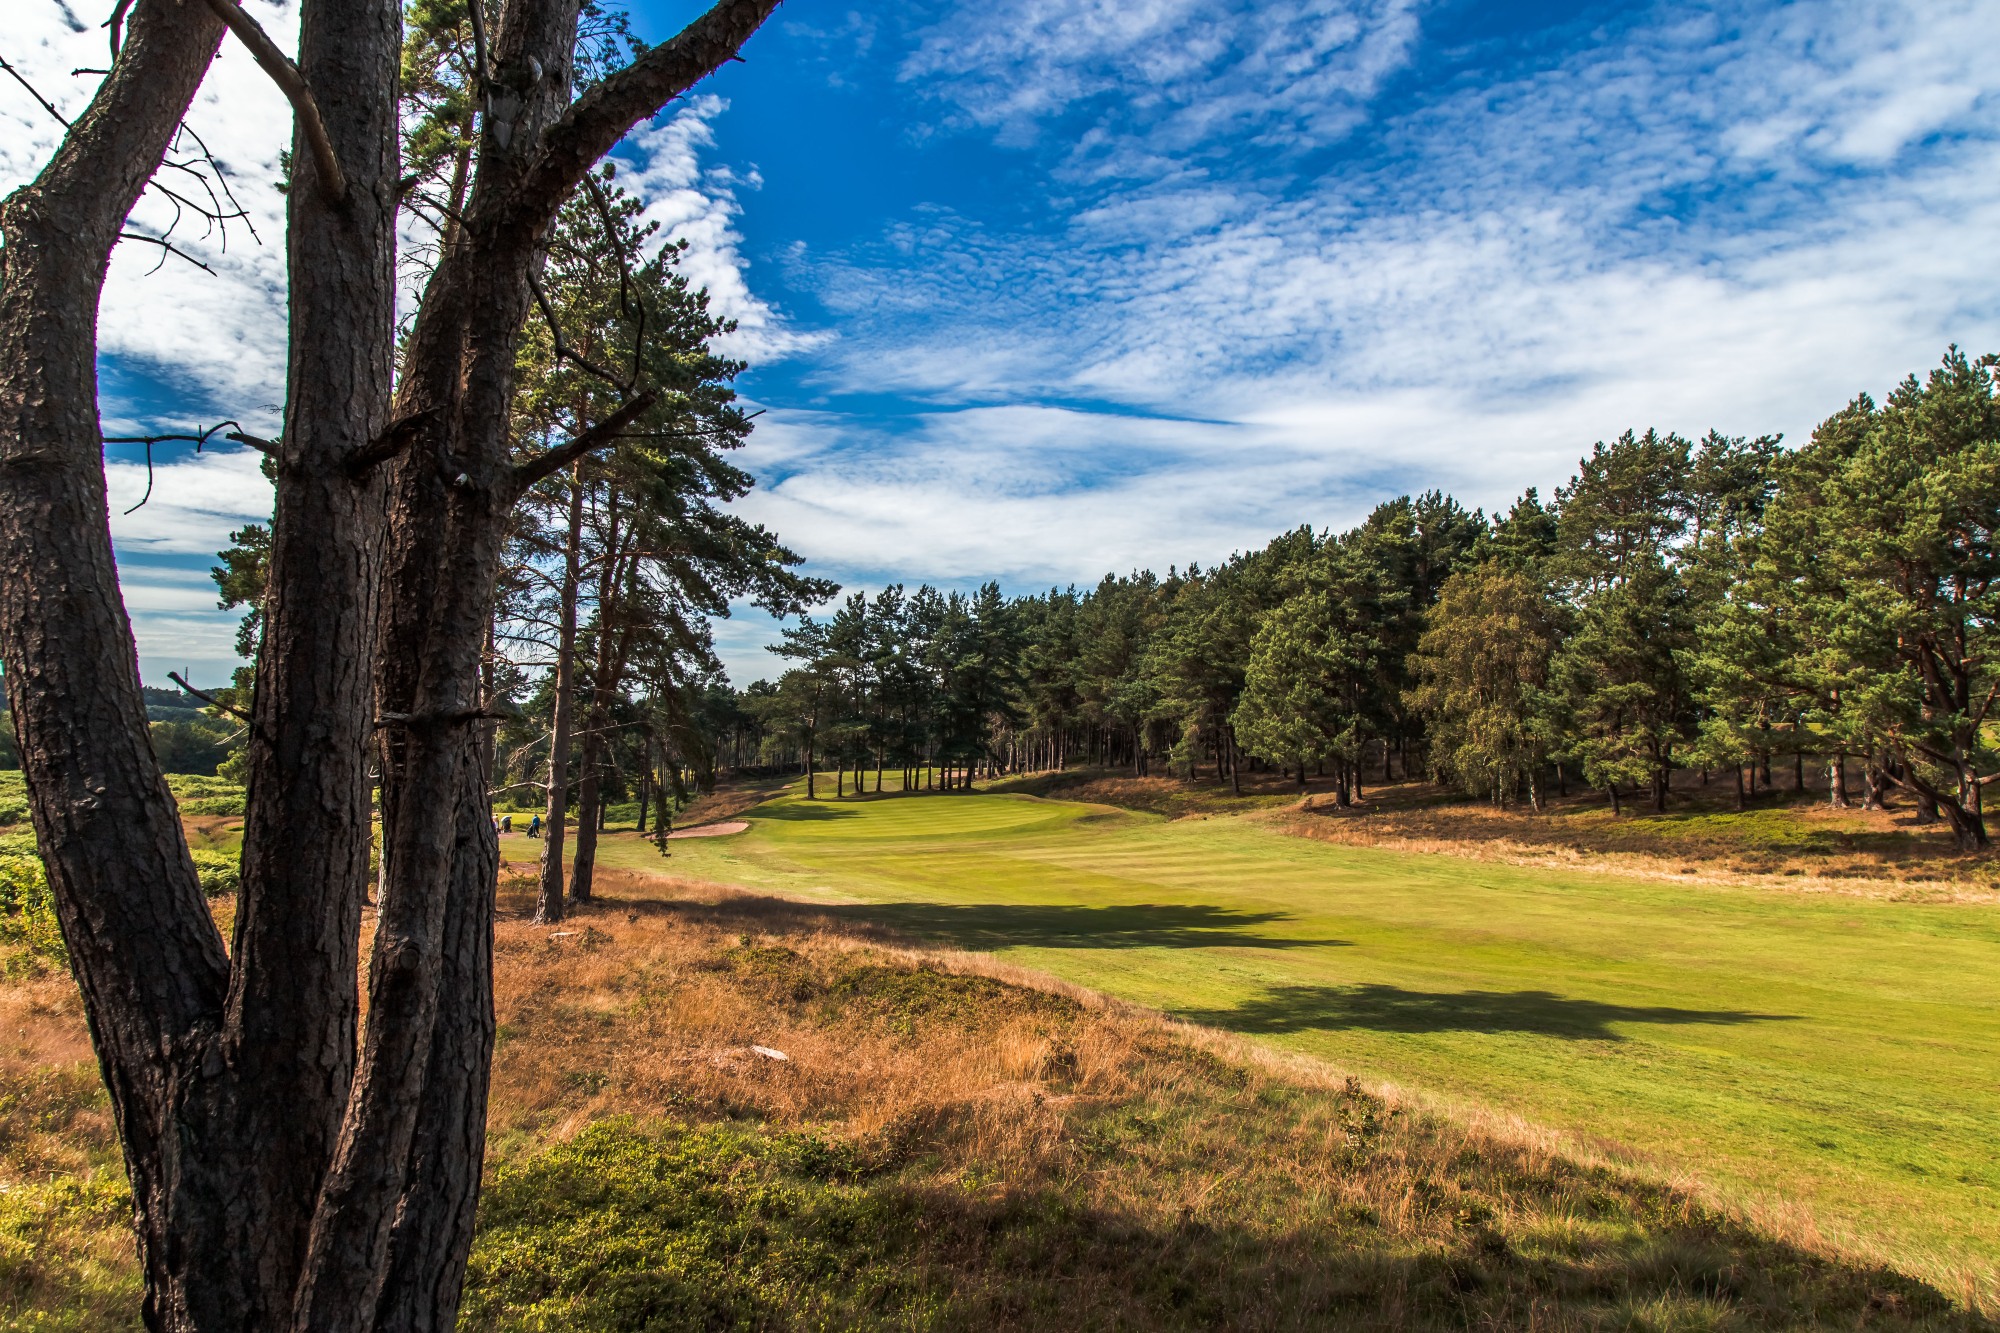 Beau Desert: Golf truly is 'oh so Beau' in the West Midlands